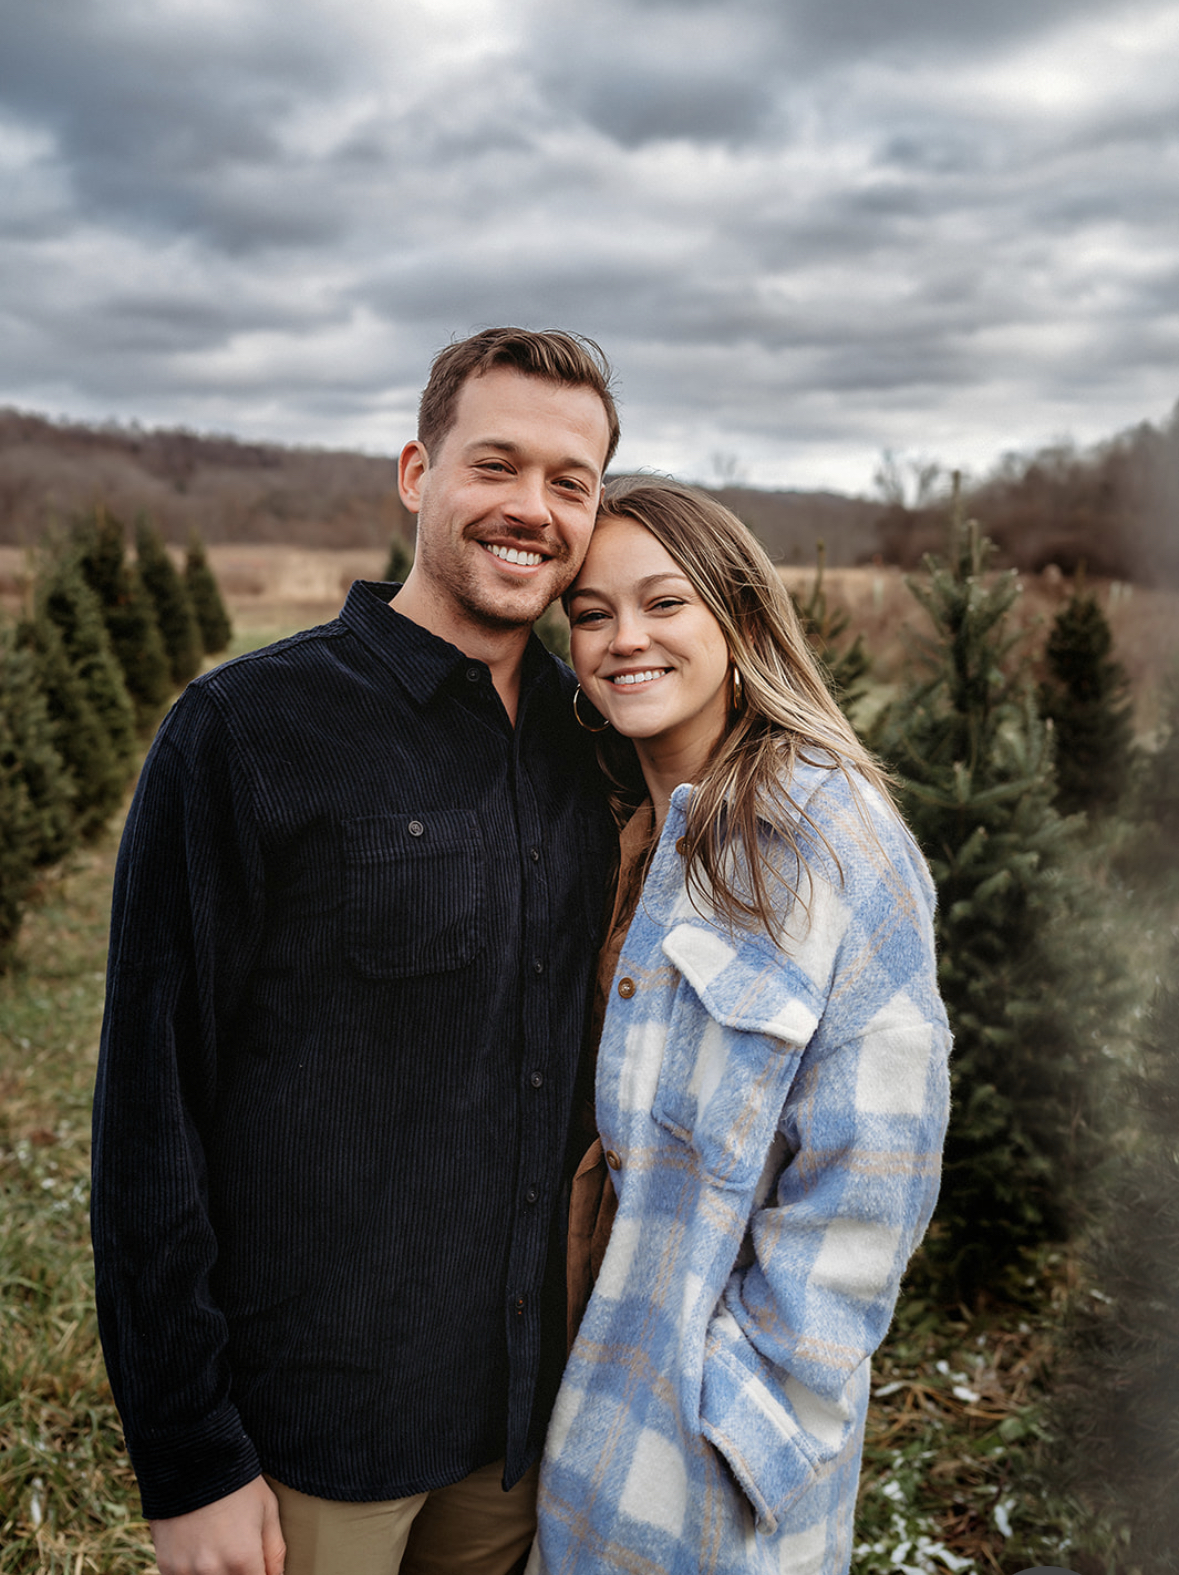 Shannon and Freddie at a Christmas tree farm